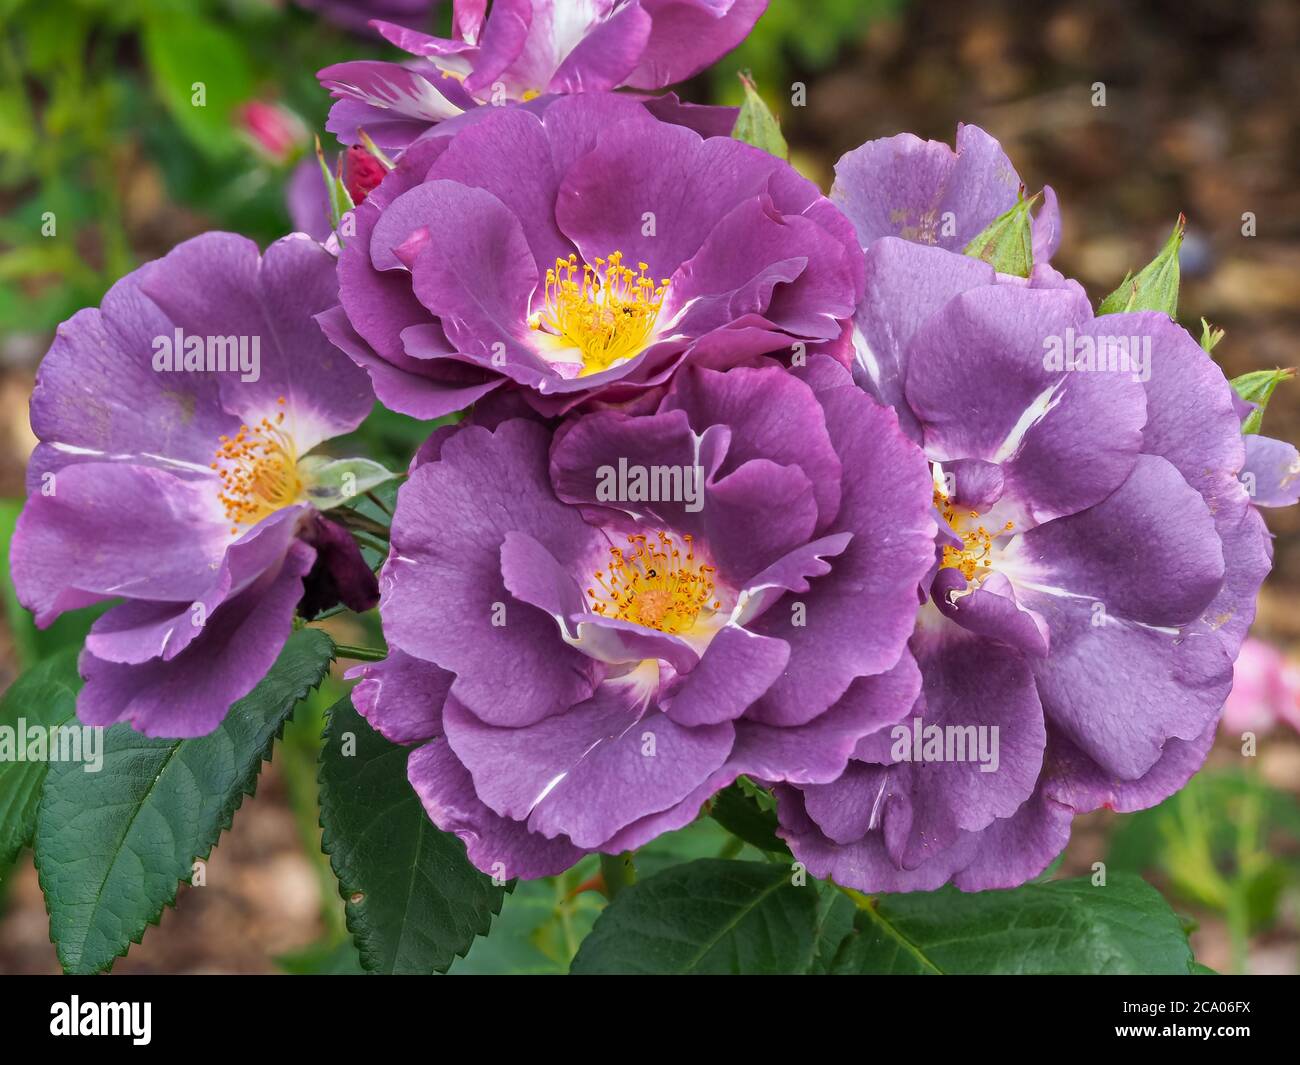 Closeup of the beautiful purple flowers of a rose, variety Rhapsody in Blue, in a garden Stock Photo